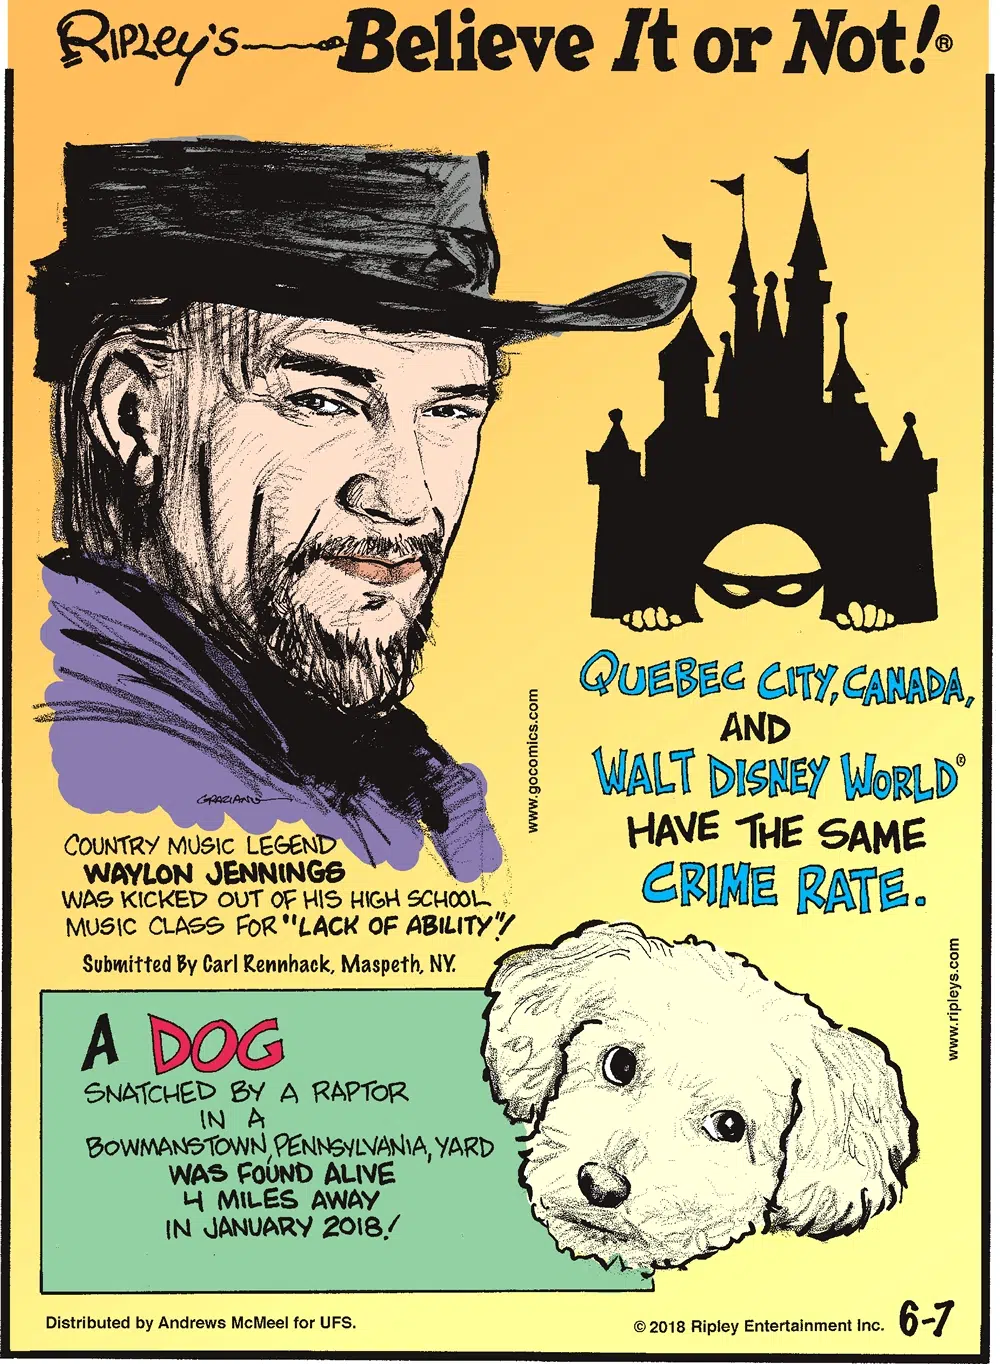 Quebec City, Canada, and Walt Disney World have the same crime rate.-------------------- Country music legend Waylon Jennings was kicked out of his high school music class for "lack of ability"! Submitted by Carl Rennhack, Maspeth, NY.-------------------- A dog snatched by a raptor in a Bowmanstown, Pennsylvania, yard was found alive 4 miles away in January 2018!